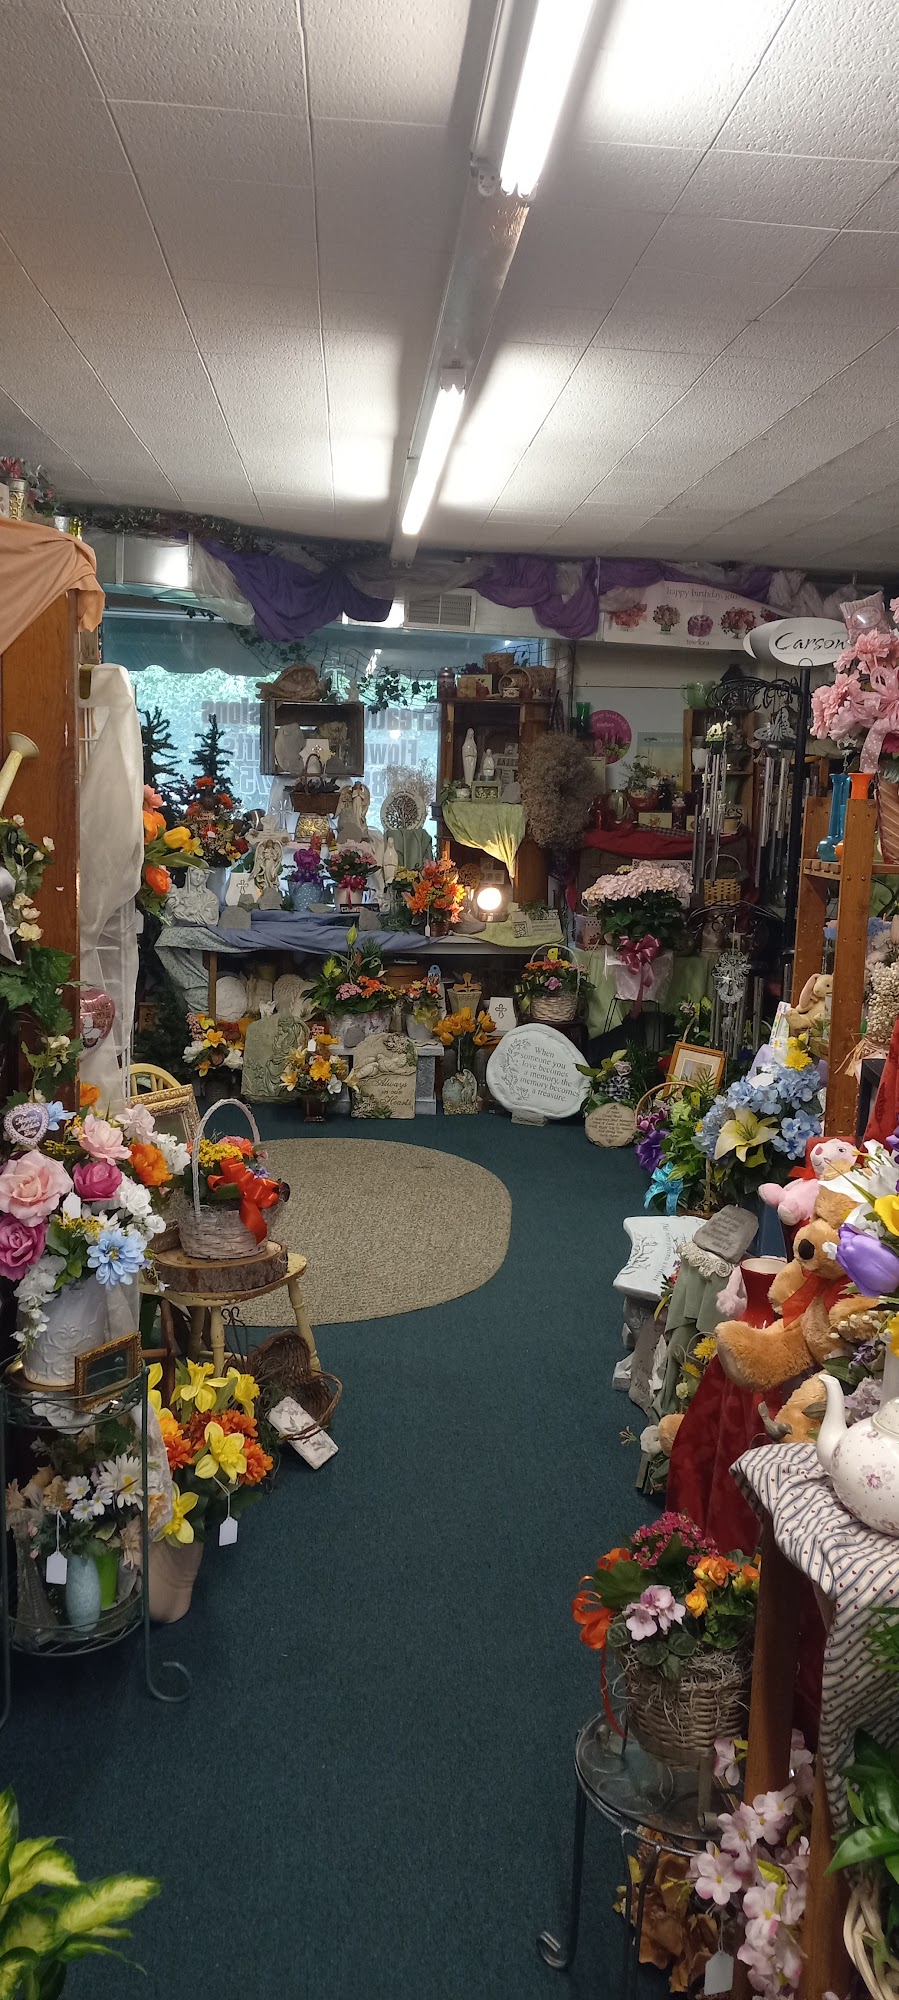 Creative Expressions Flowers and Gifts 3295 Main St, Marlette Michigan 48453